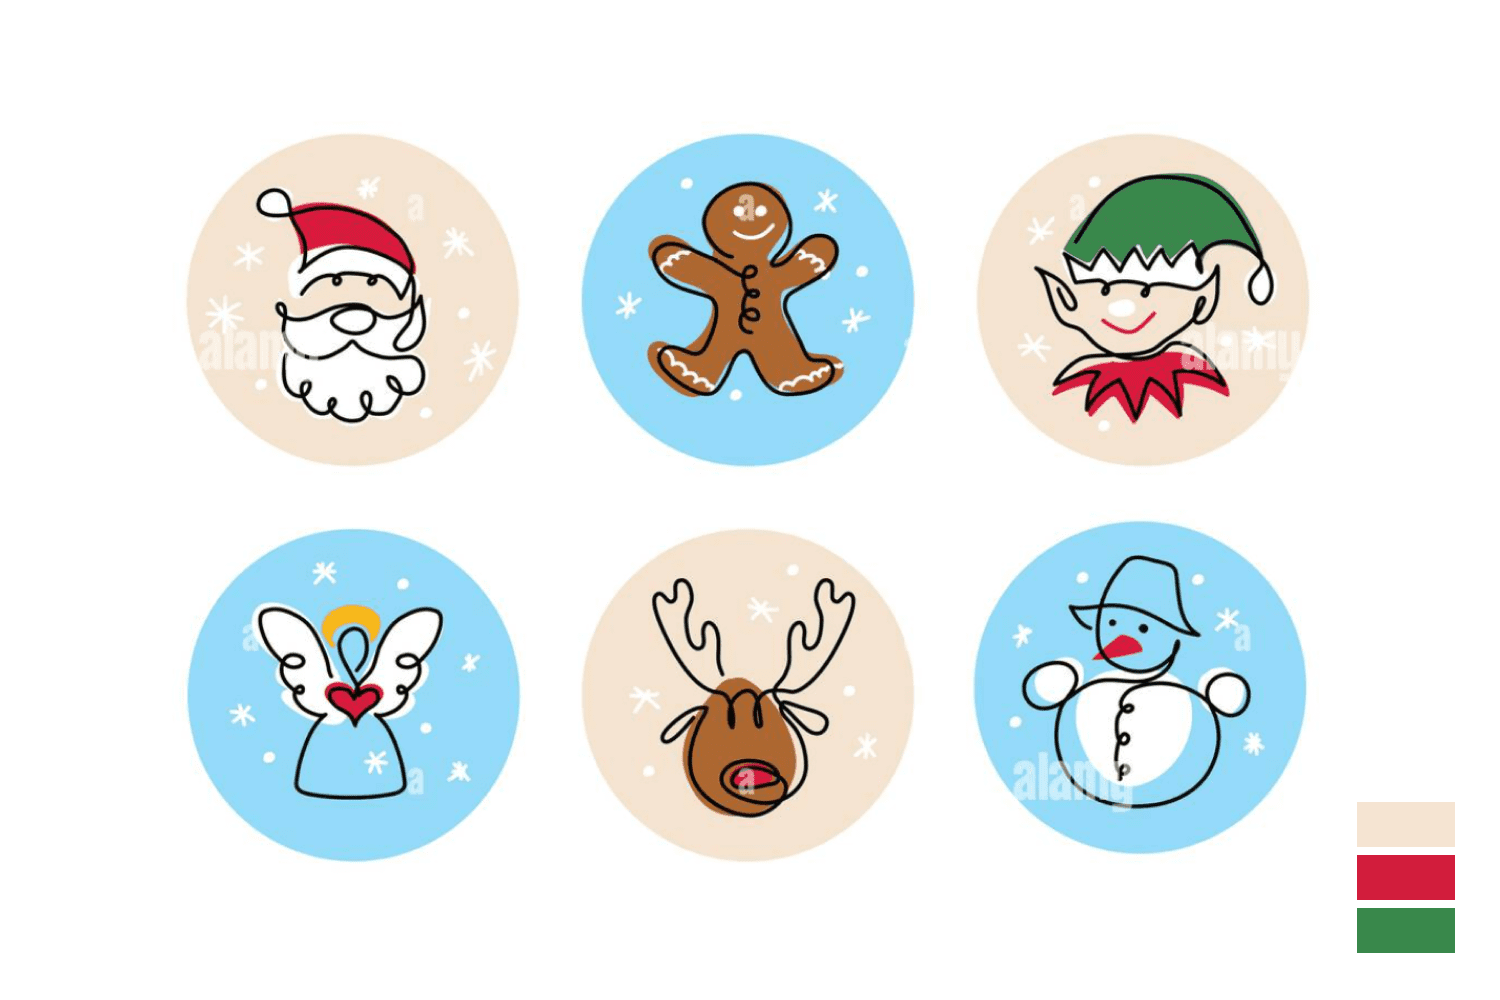 Rounded Christmas icons in a drawing style and a calmer color palette.